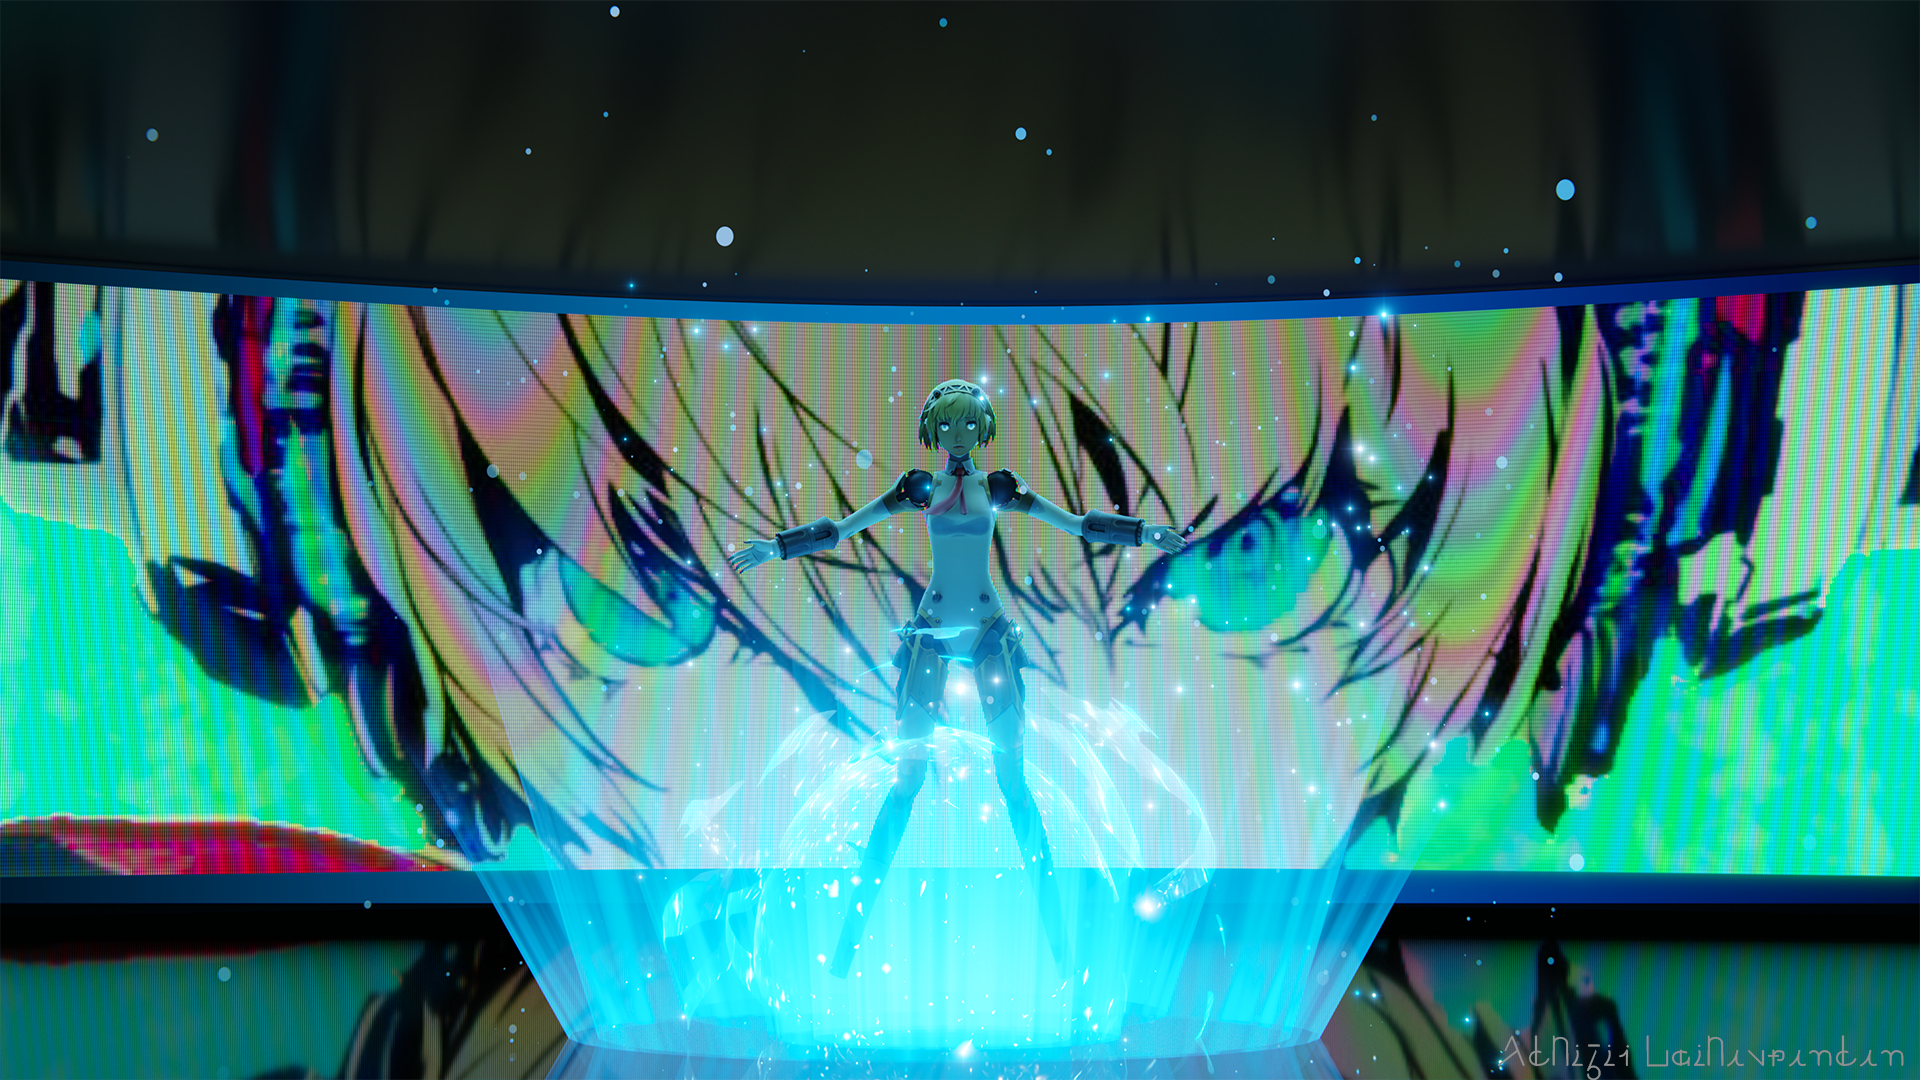 Persona 3 Reload Gets New Character Trailer for Aigis